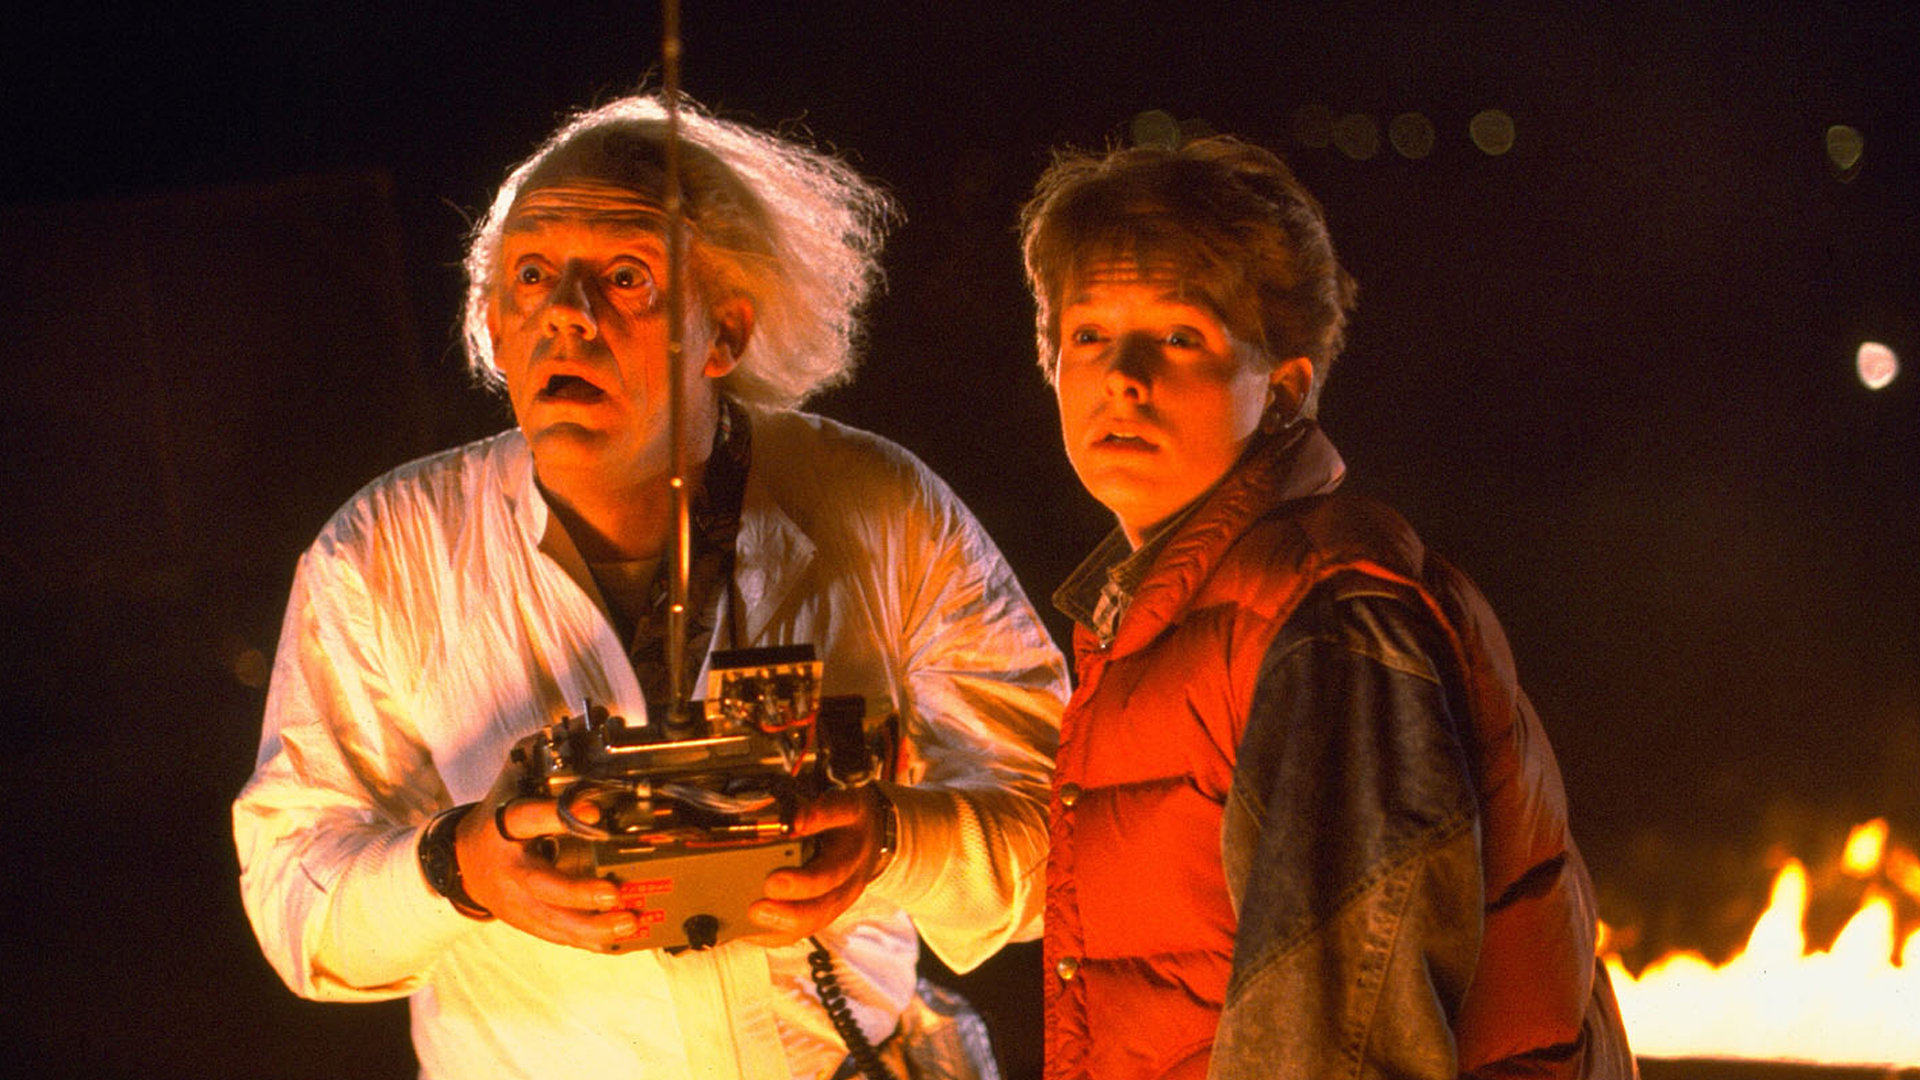 Back To The Future wallpaper 1920x1080 Full HD (1080p) desktop background